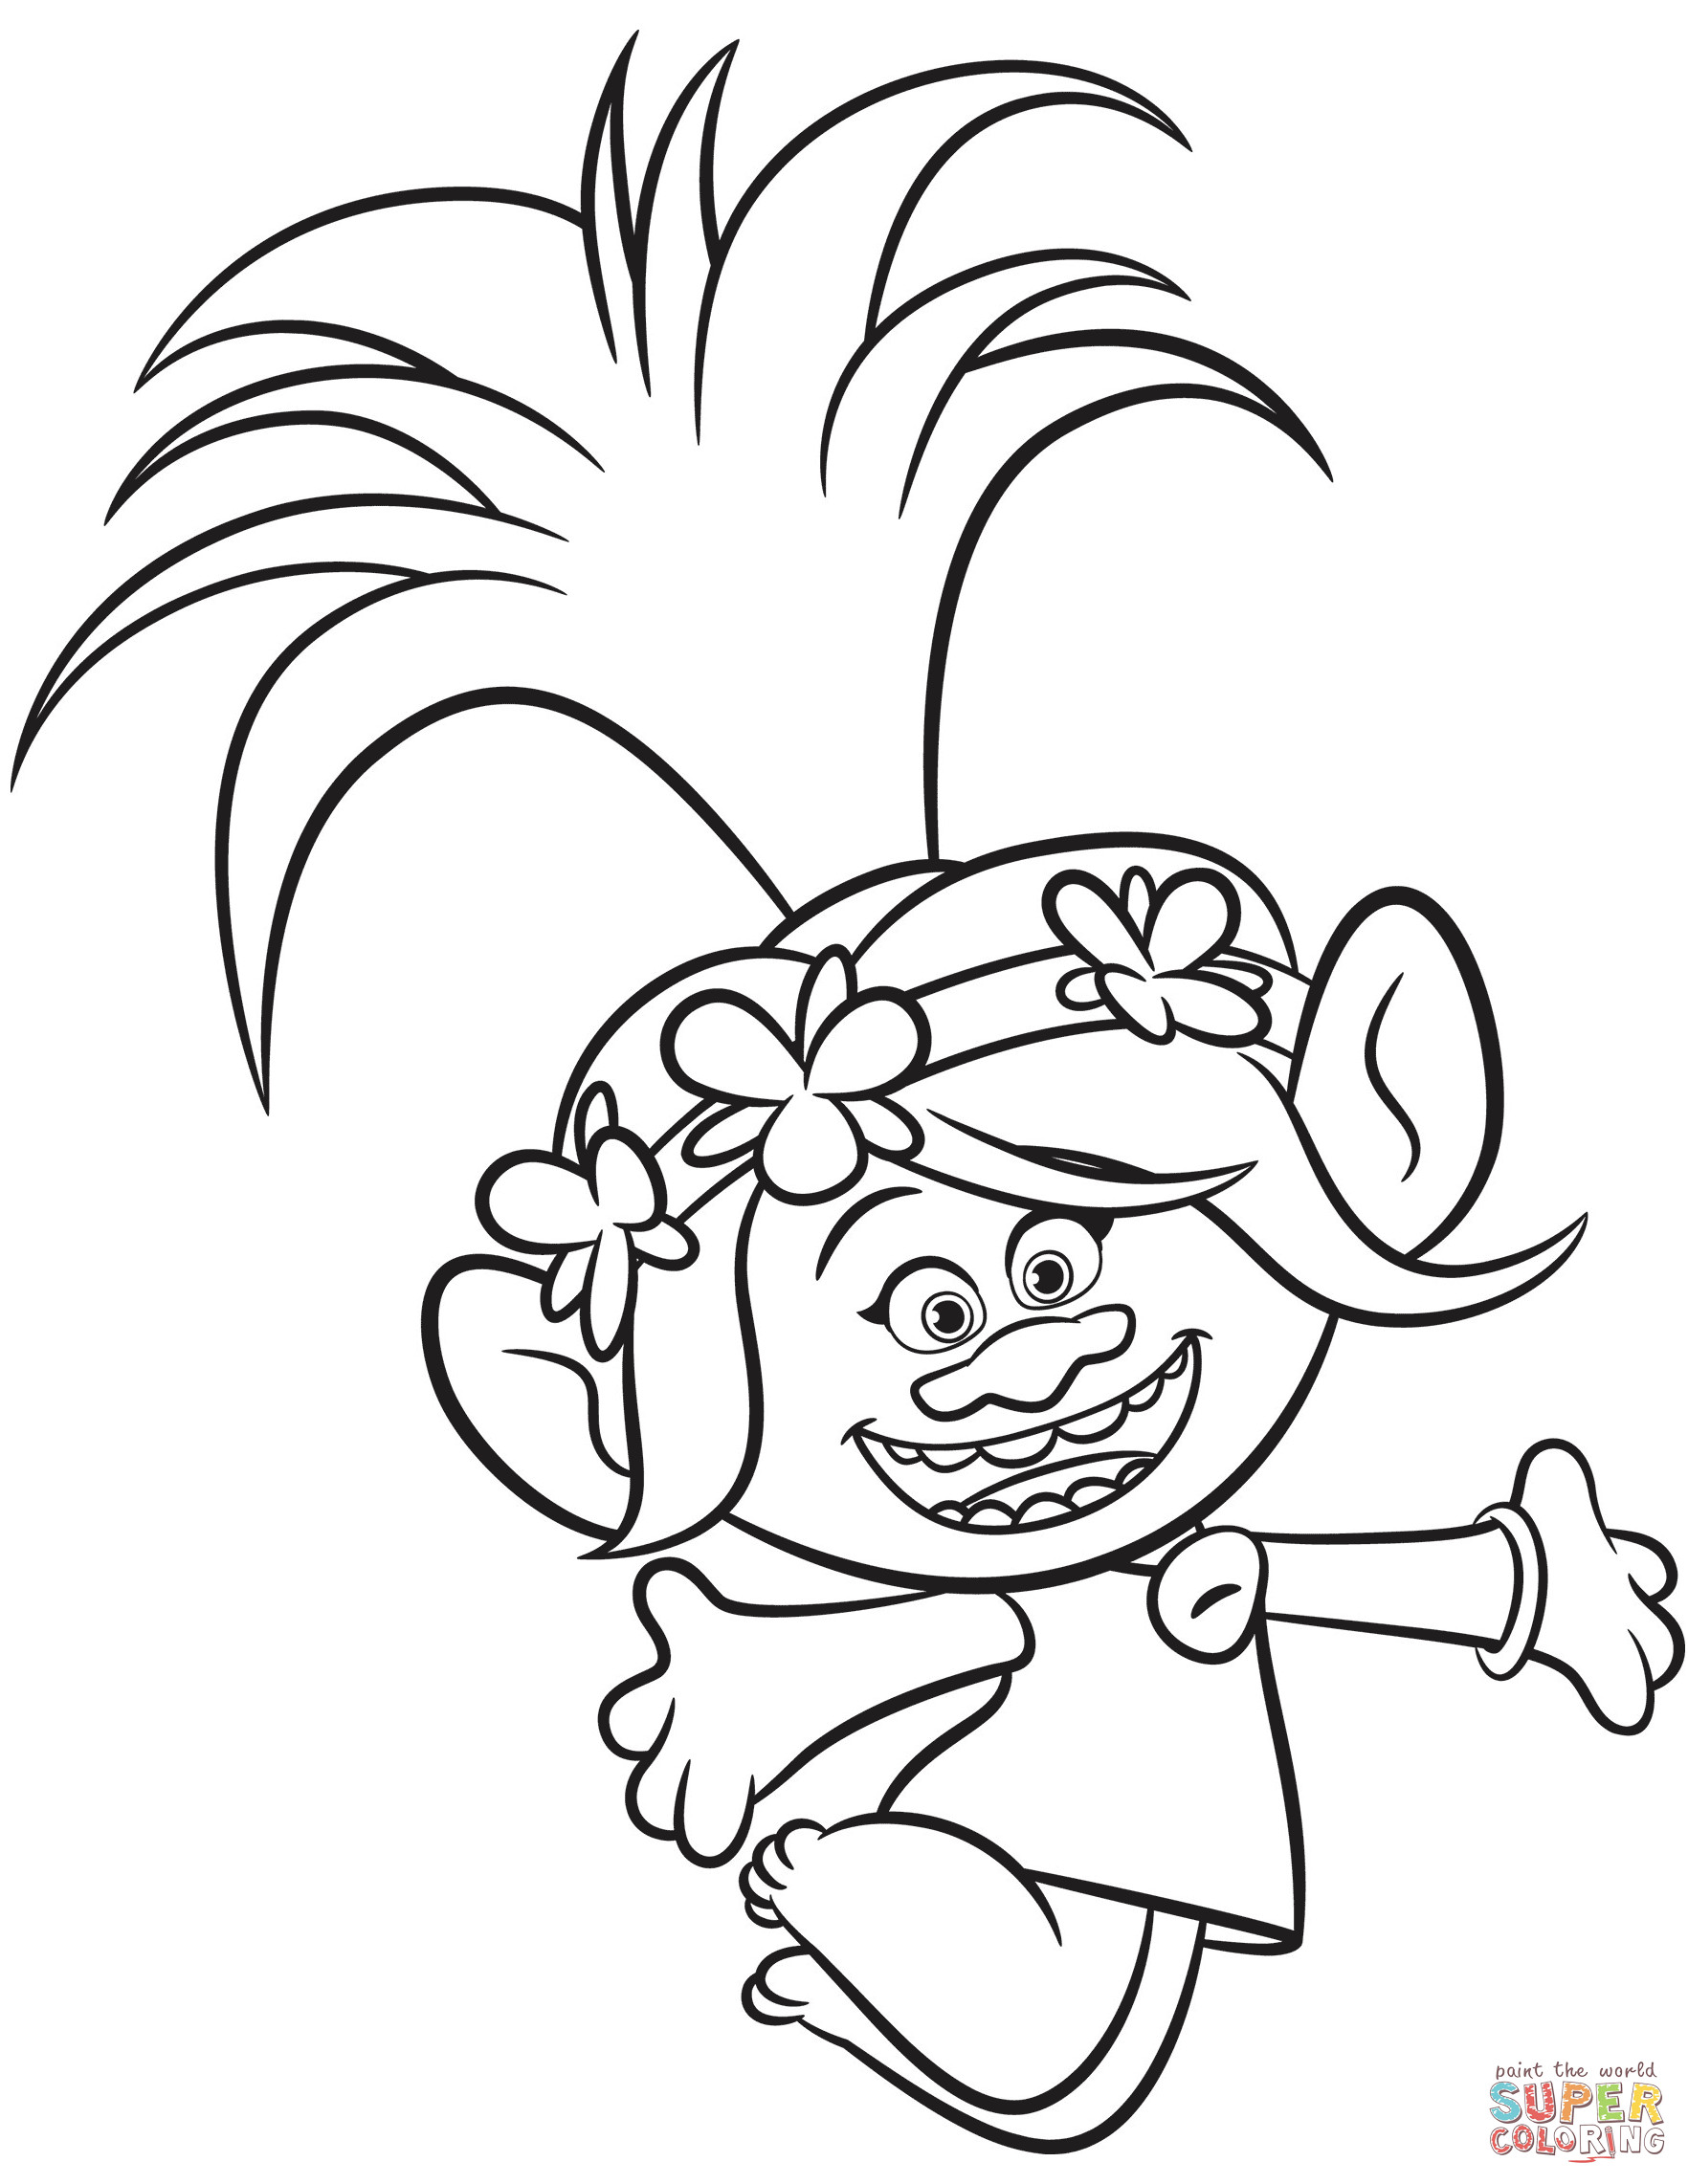 Poppy Trolls Coloring Pages
 Poppy from Trolls coloring page